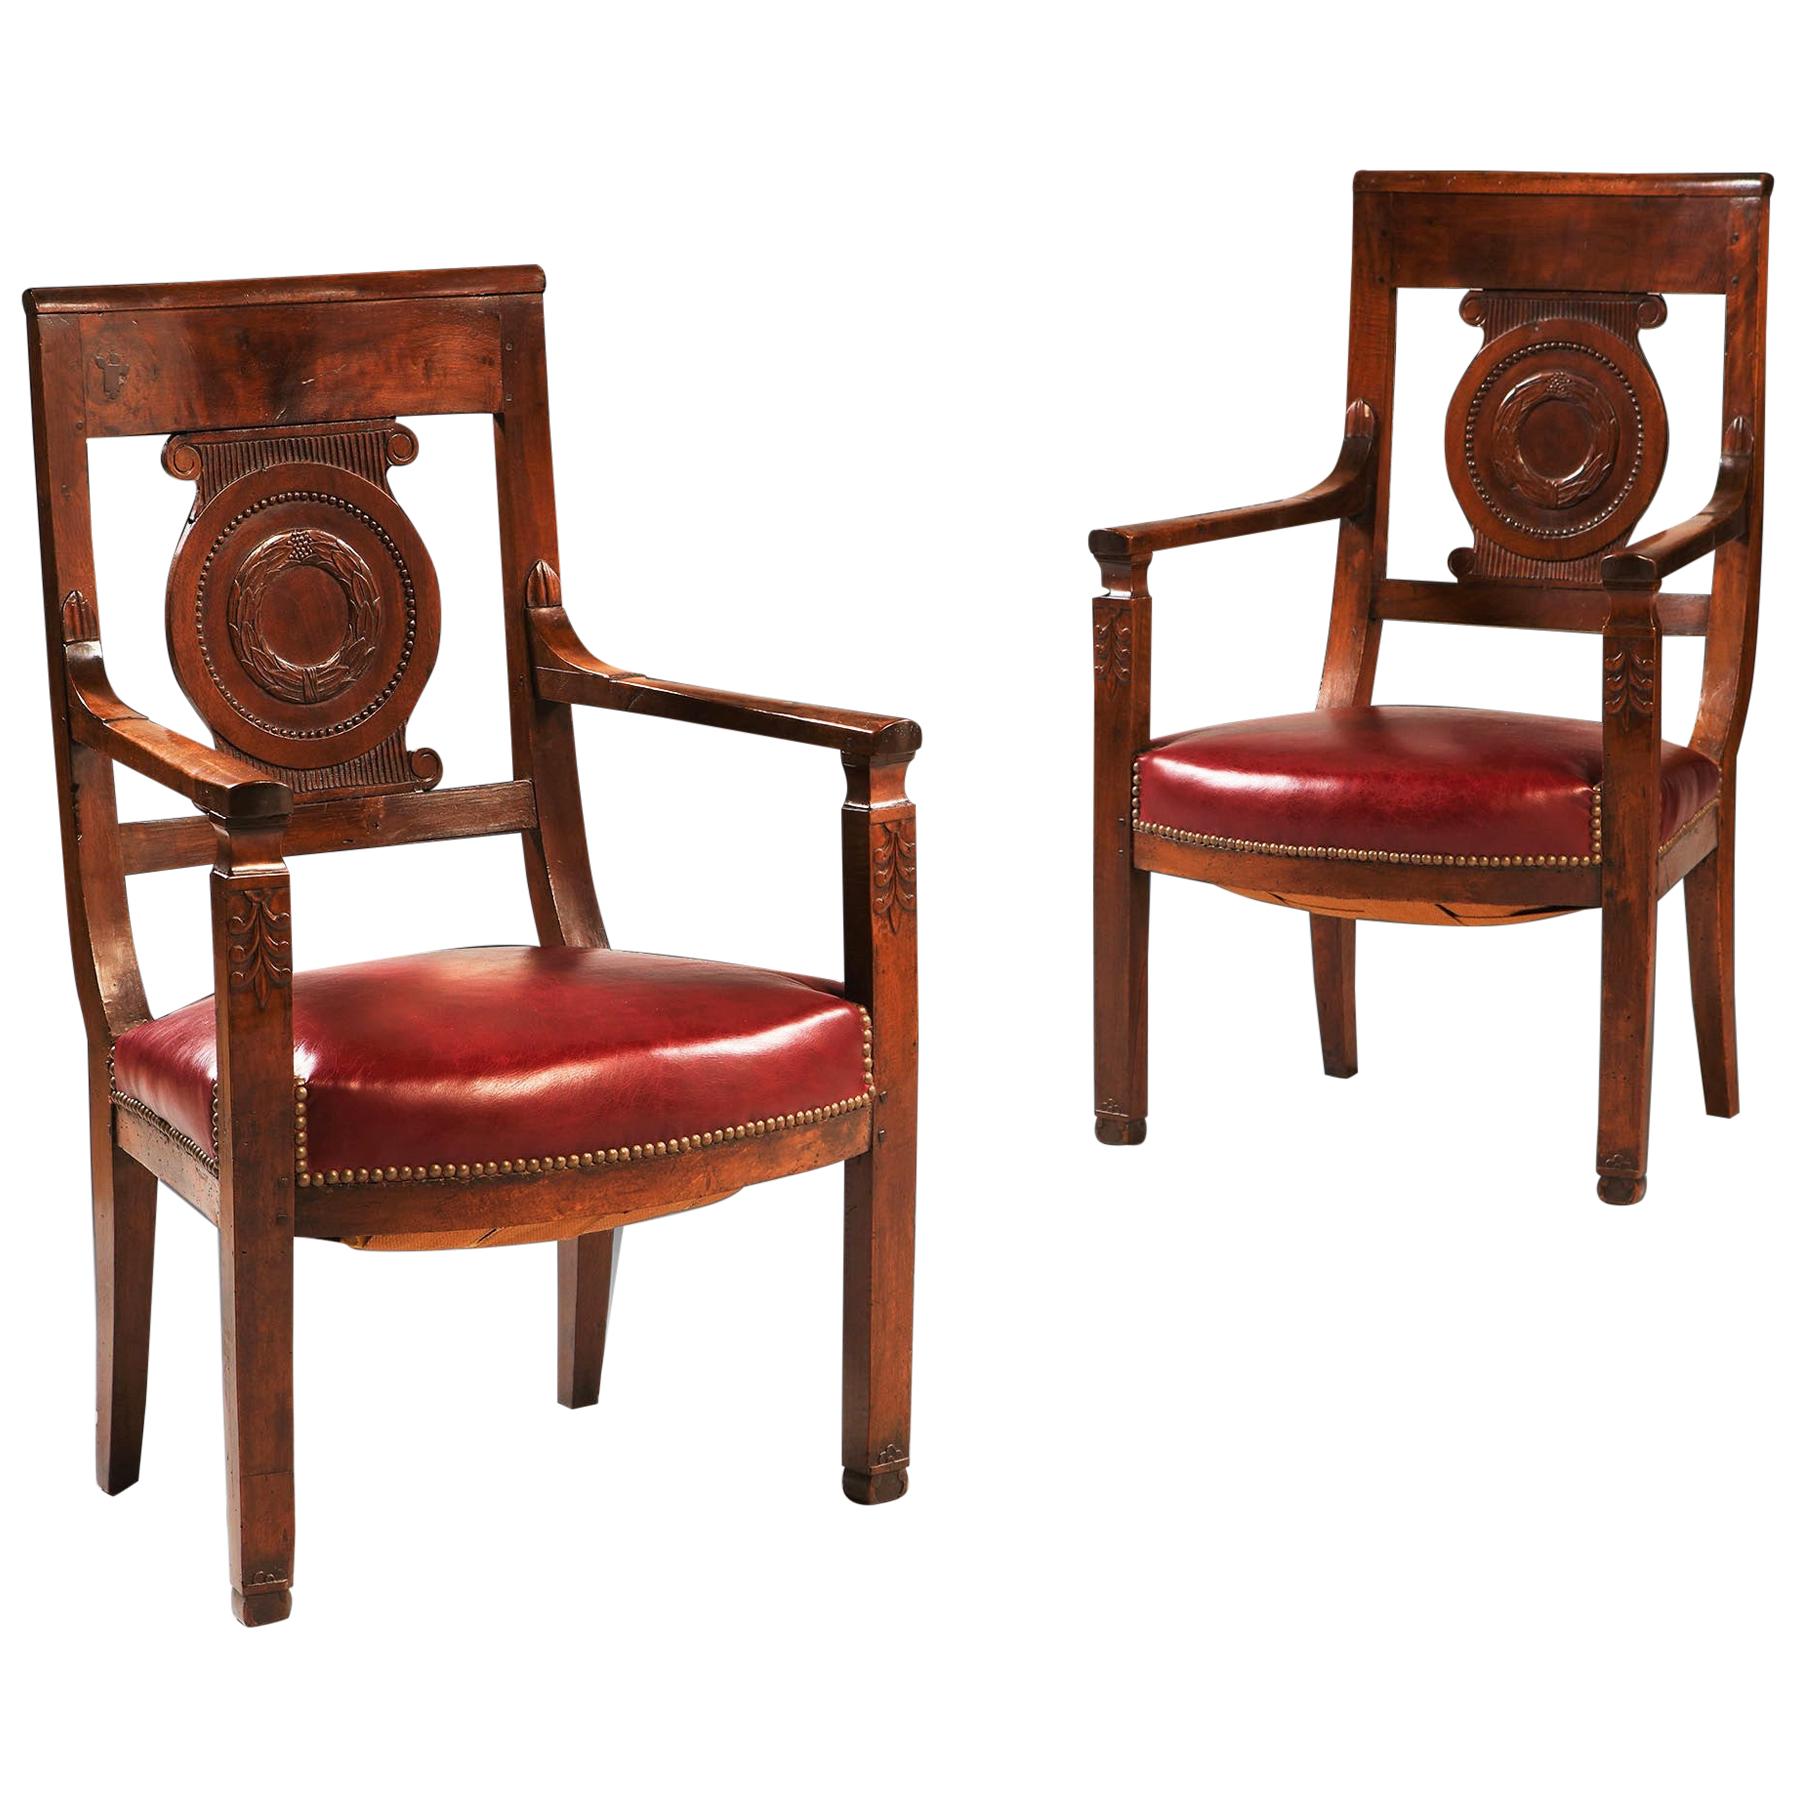 19th Century French Empire Mahogany Brown Wood Fauteuils or Armchairs Red, Pair For Sale